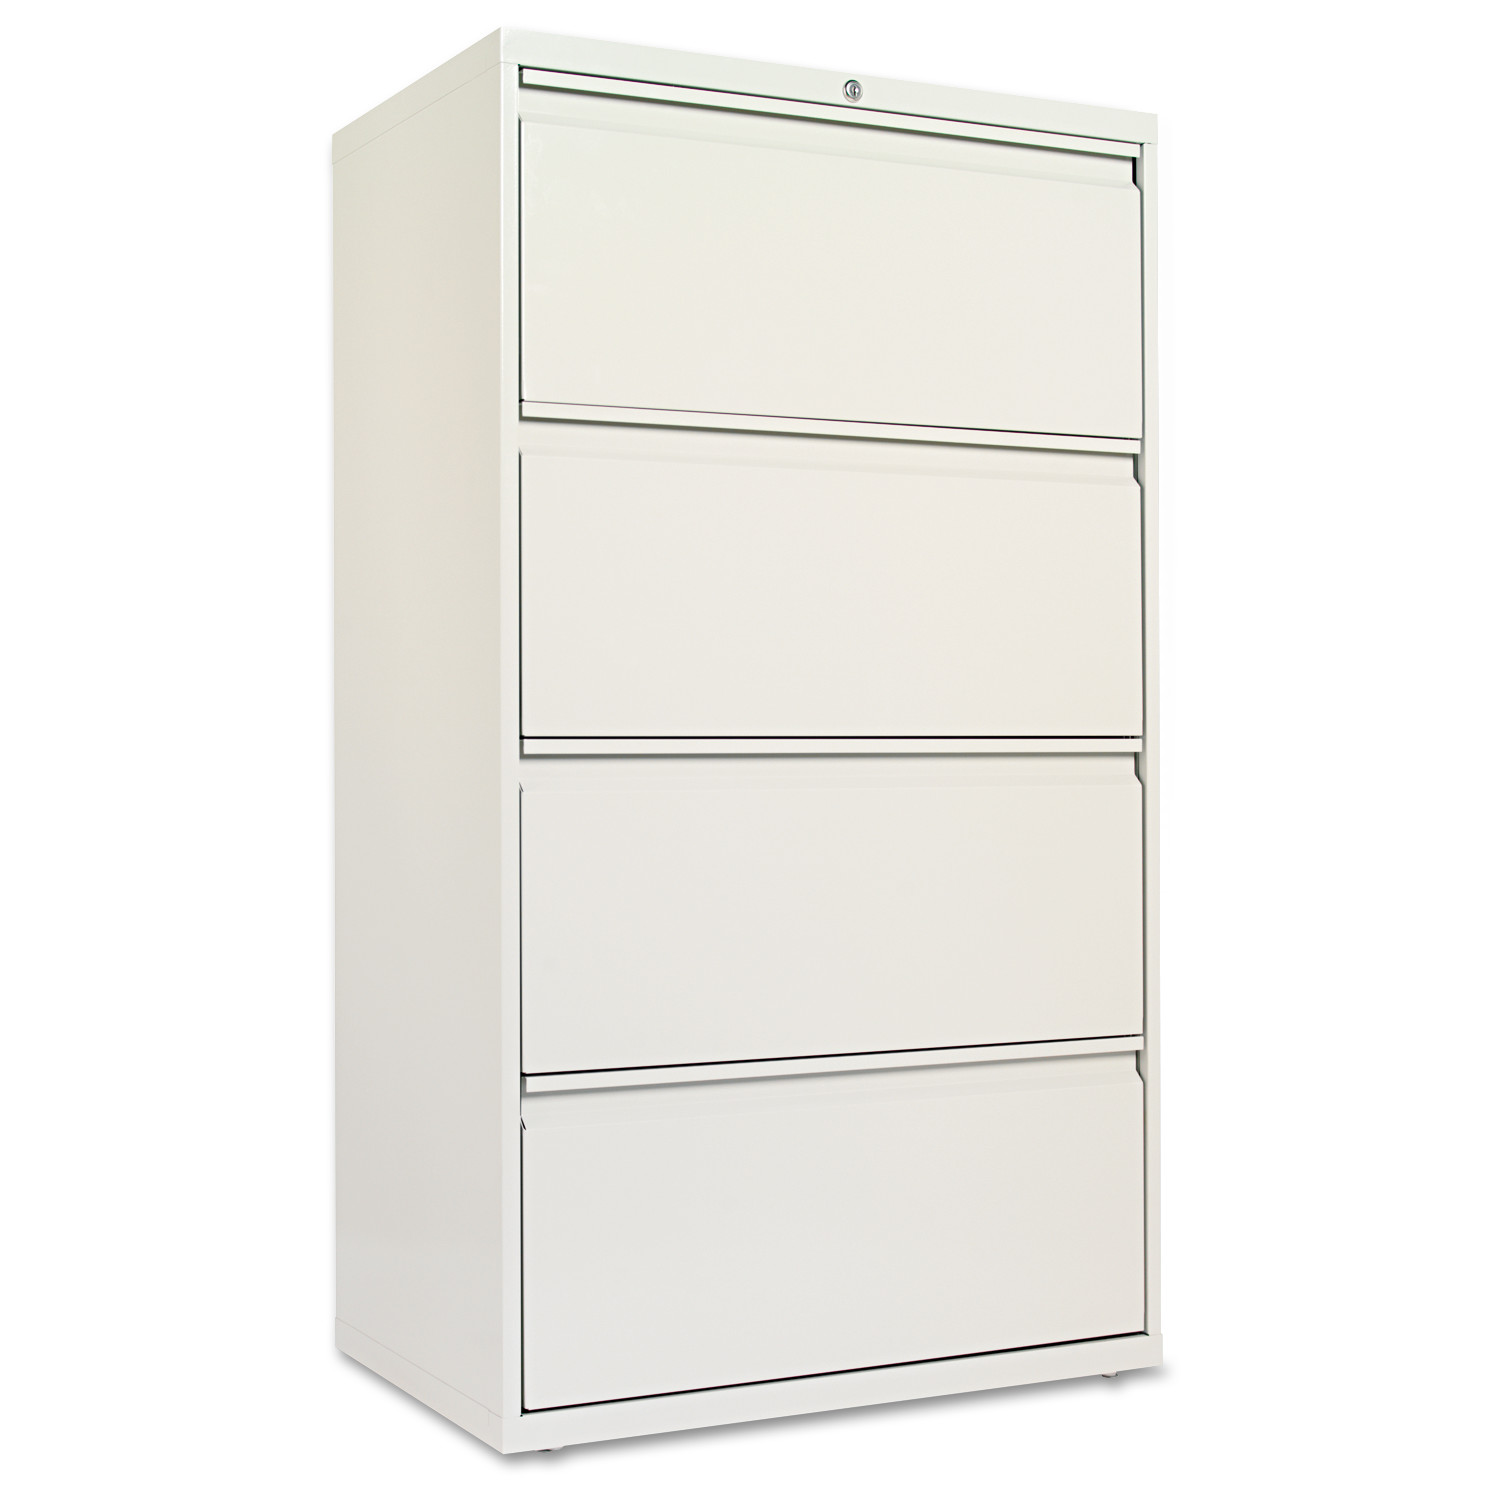 Alera 4 Drawers Lateral Lockable Filing Cabinet, Gray - image 1 of 3